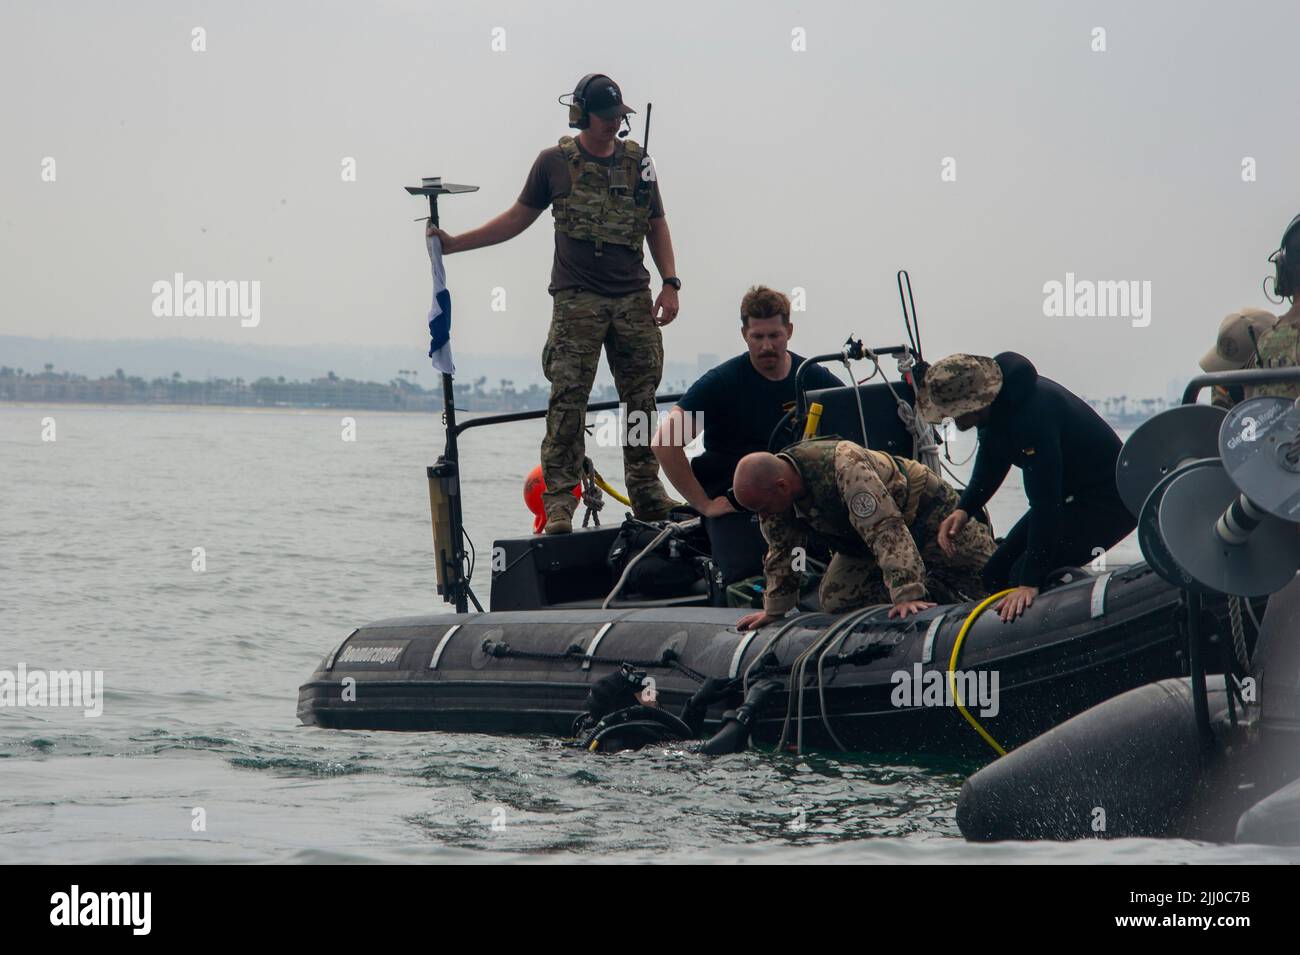 San Diego, United States. 20 July, 2022. A German diver from Seebatallion Mine Clearance Diving Unit surfaces while performing a Mine Exploitation Exercise at Rim of the Pacific exercises, July 20, 2022 in San Diego, California. Credit: MC3 Larissa Dougherty/U.S. Navy/Alamy Live News Stock Photo